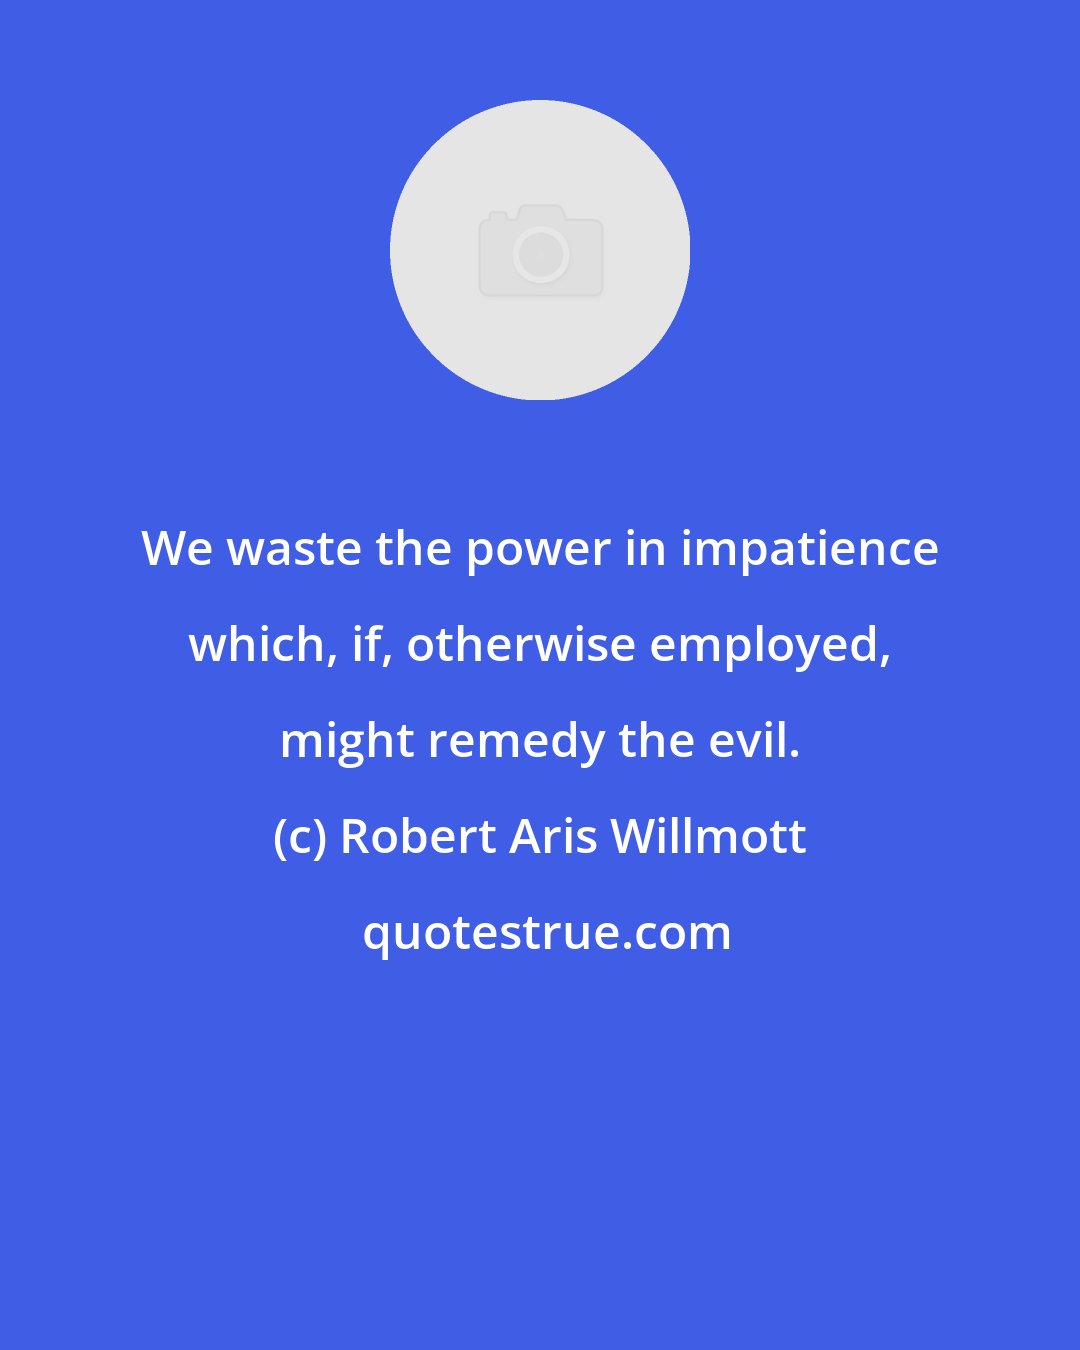 Robert Aris Willmott: We waste the power in impatience which, if, otherwise employed, might remedy the evil.